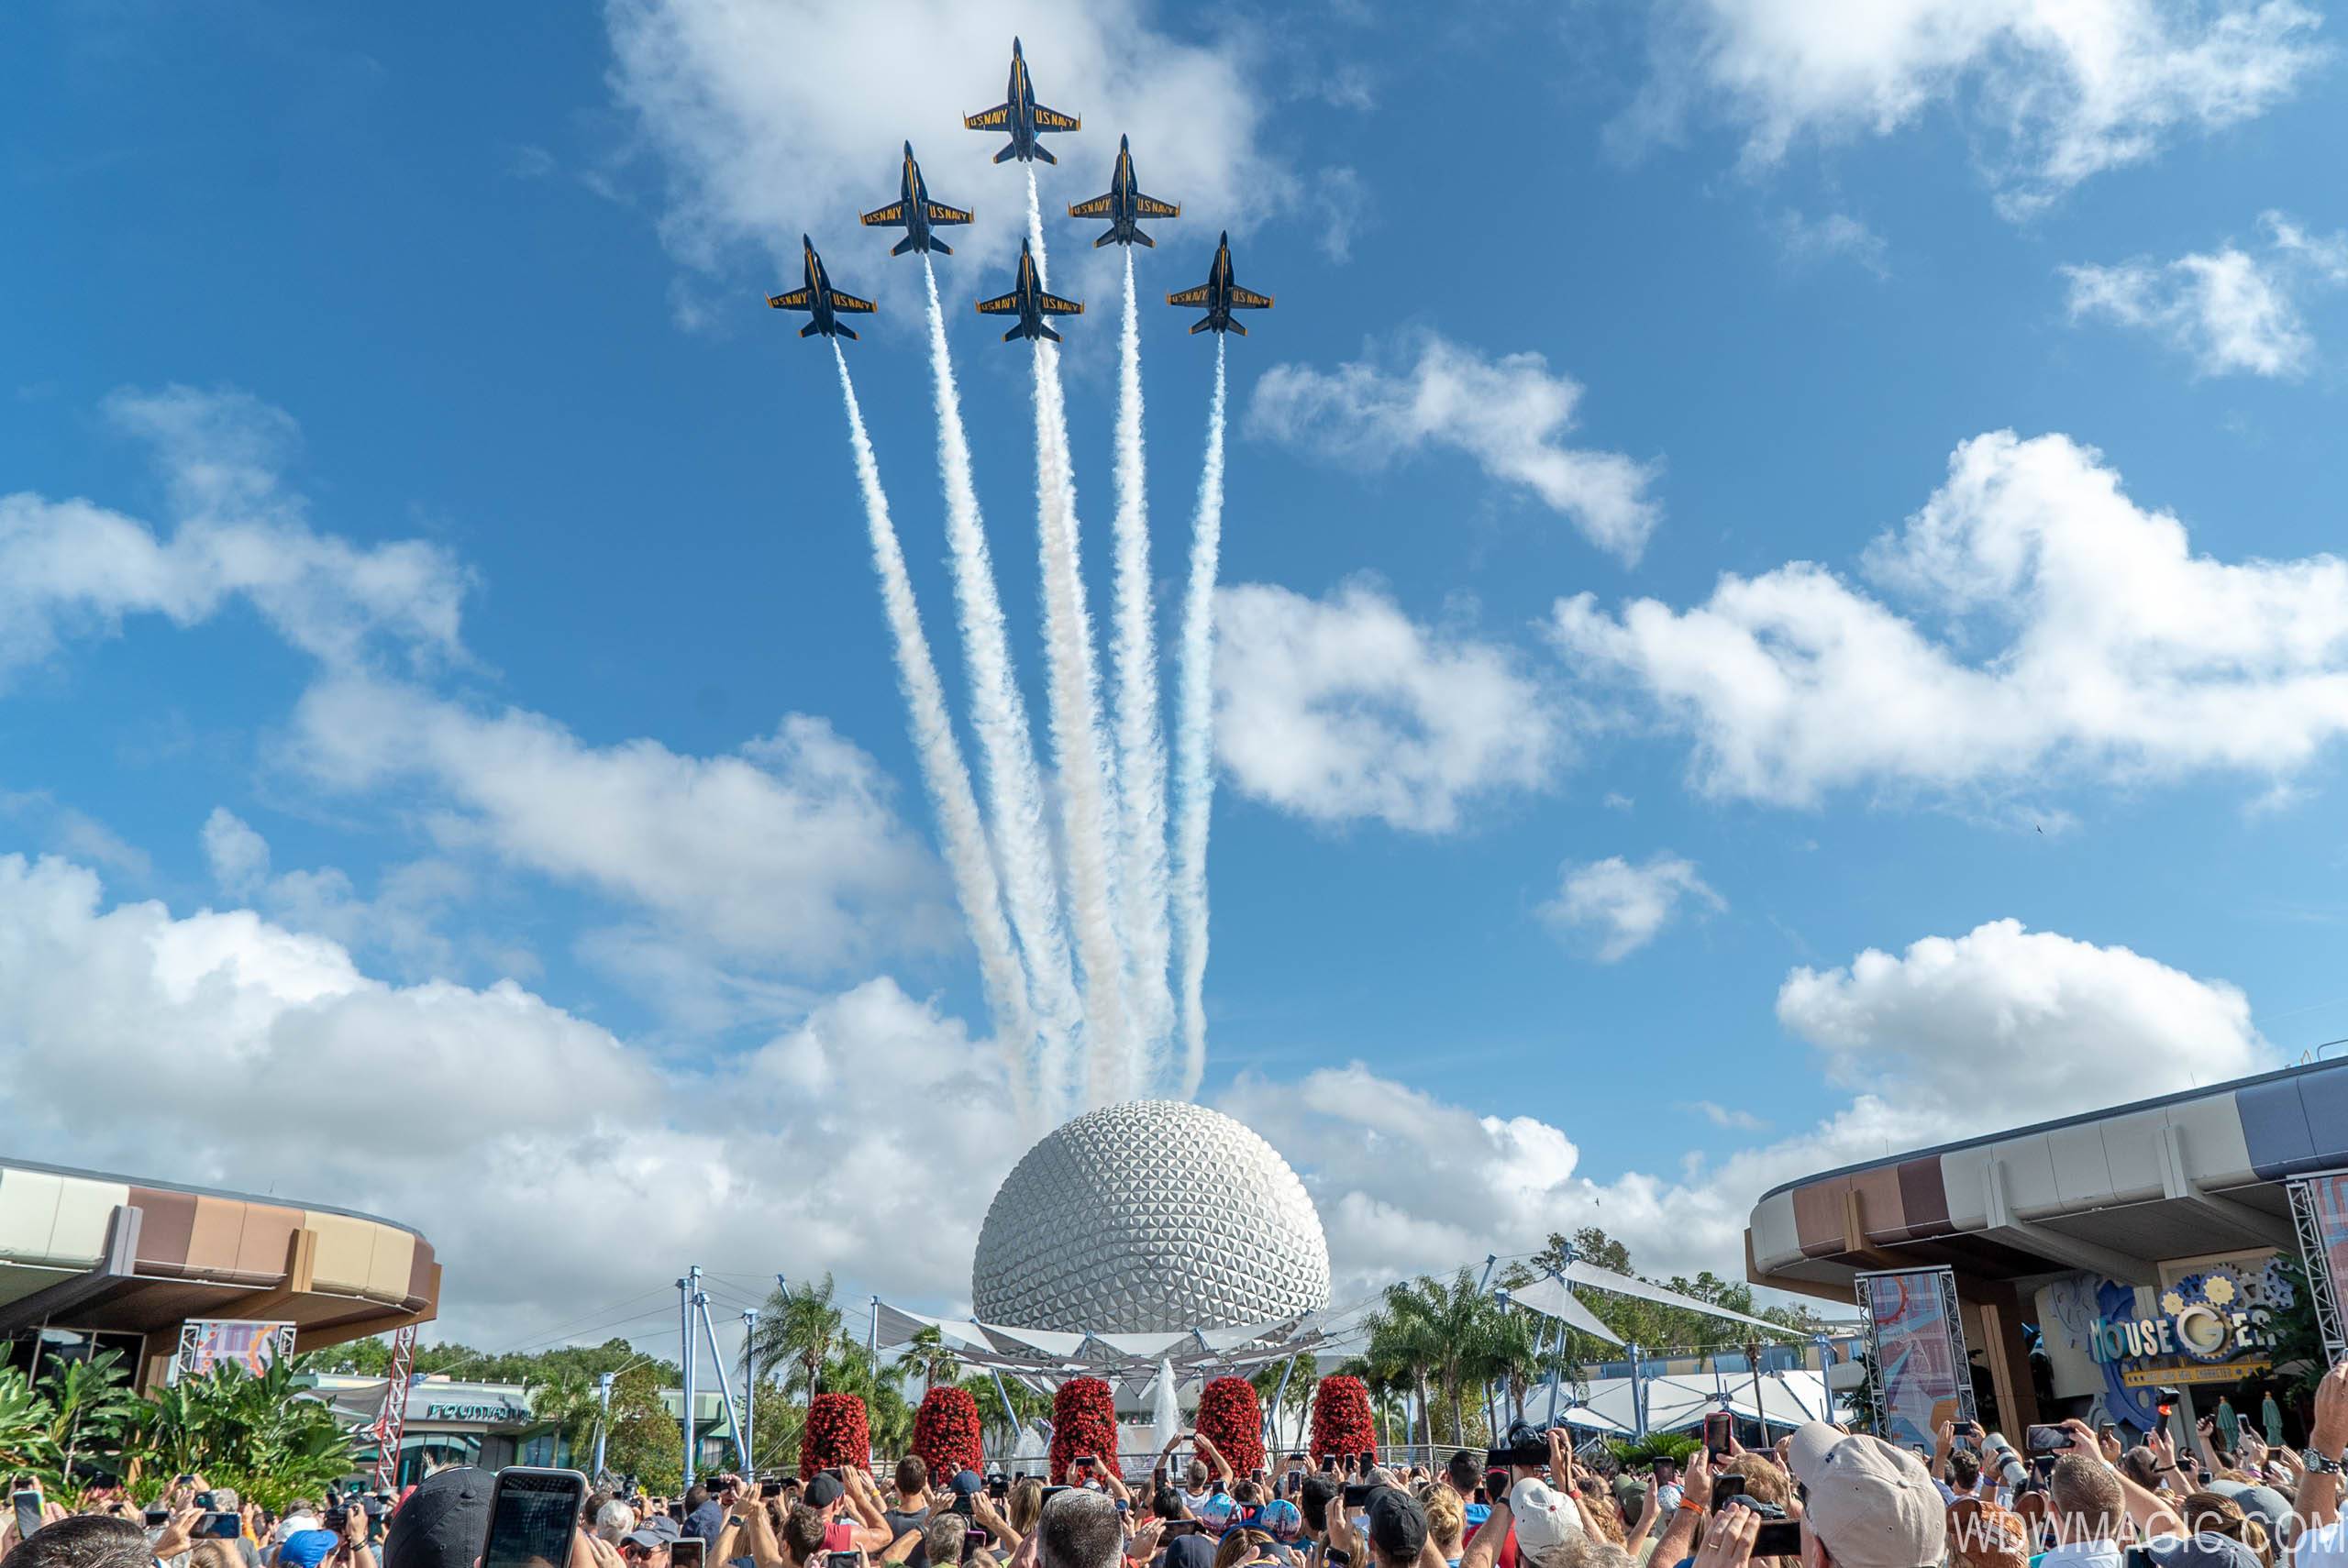 PHOTOS - United States Navy's flight demonstration squadron -The Blue Angels make spectacular flight over Epcot